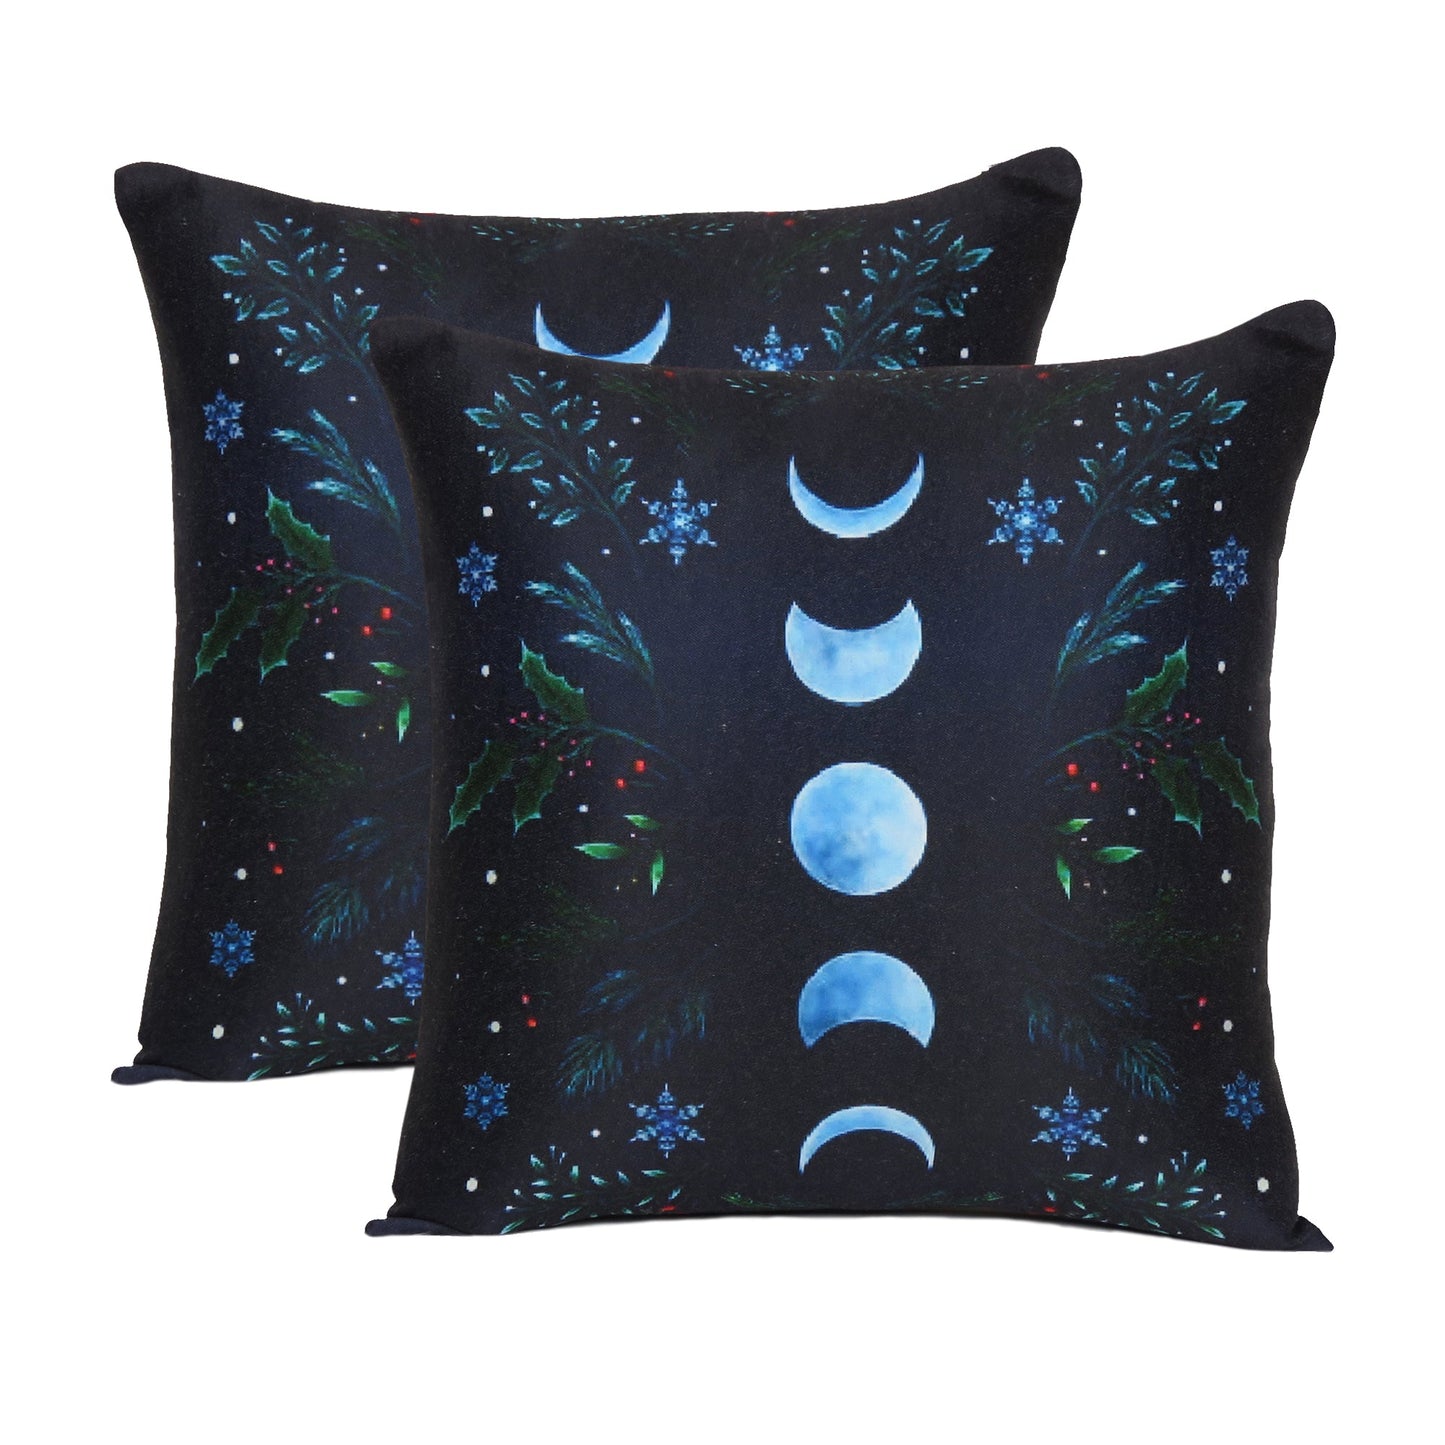 Blue Moon Print Cushion Cover in Set of 2